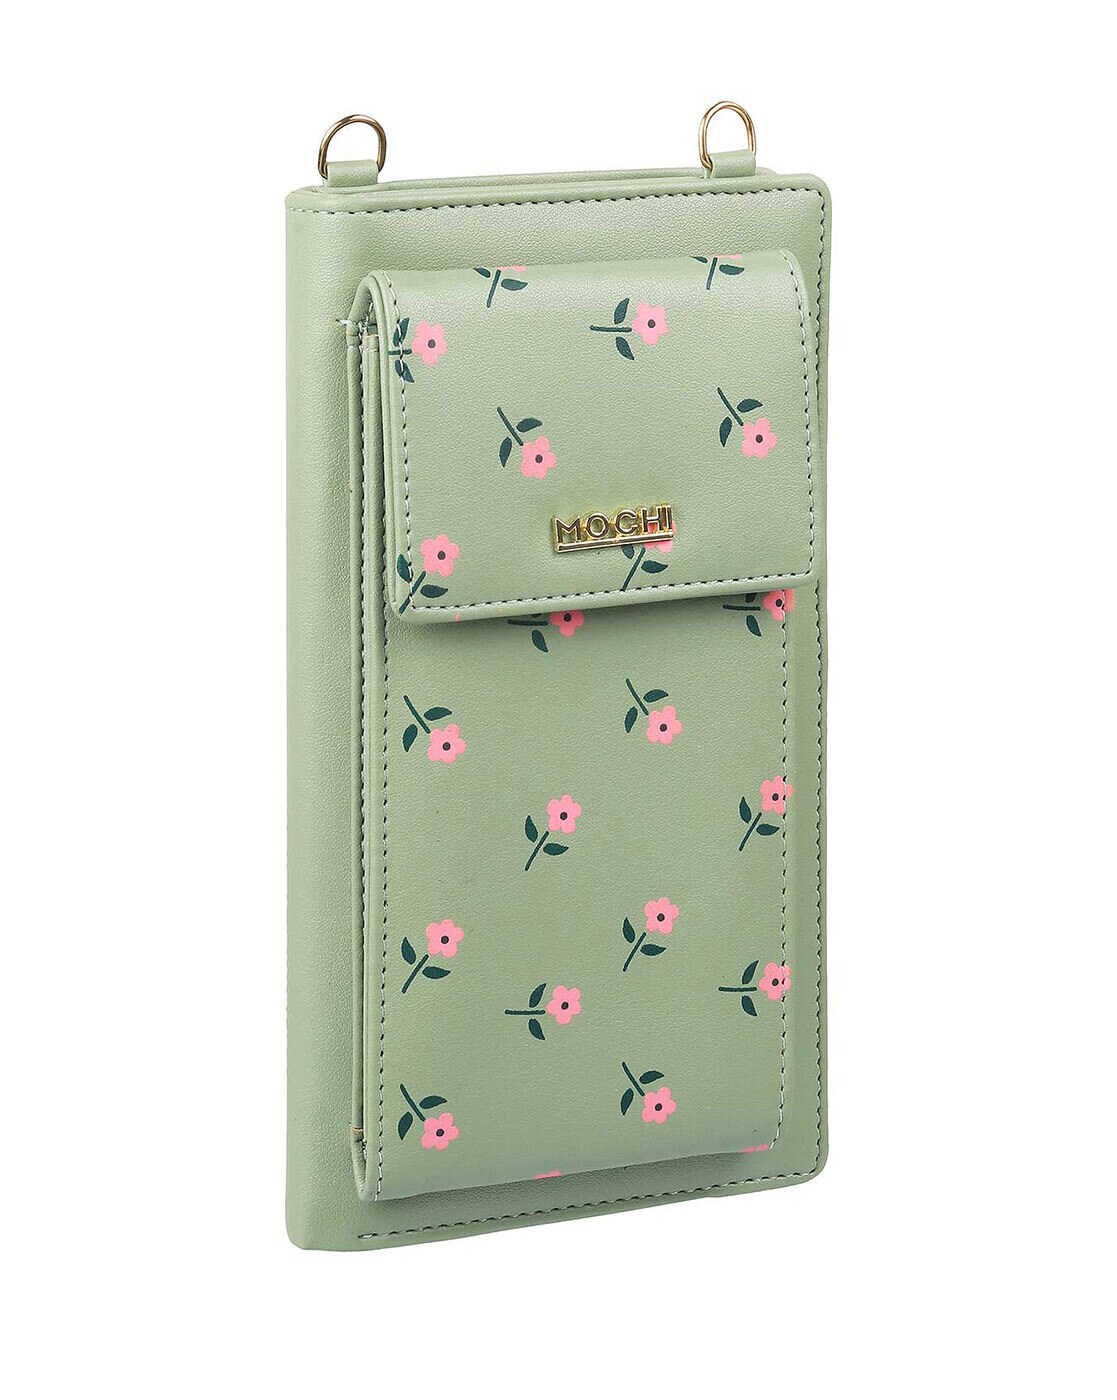 Floral Print Travel Wallet with Strap